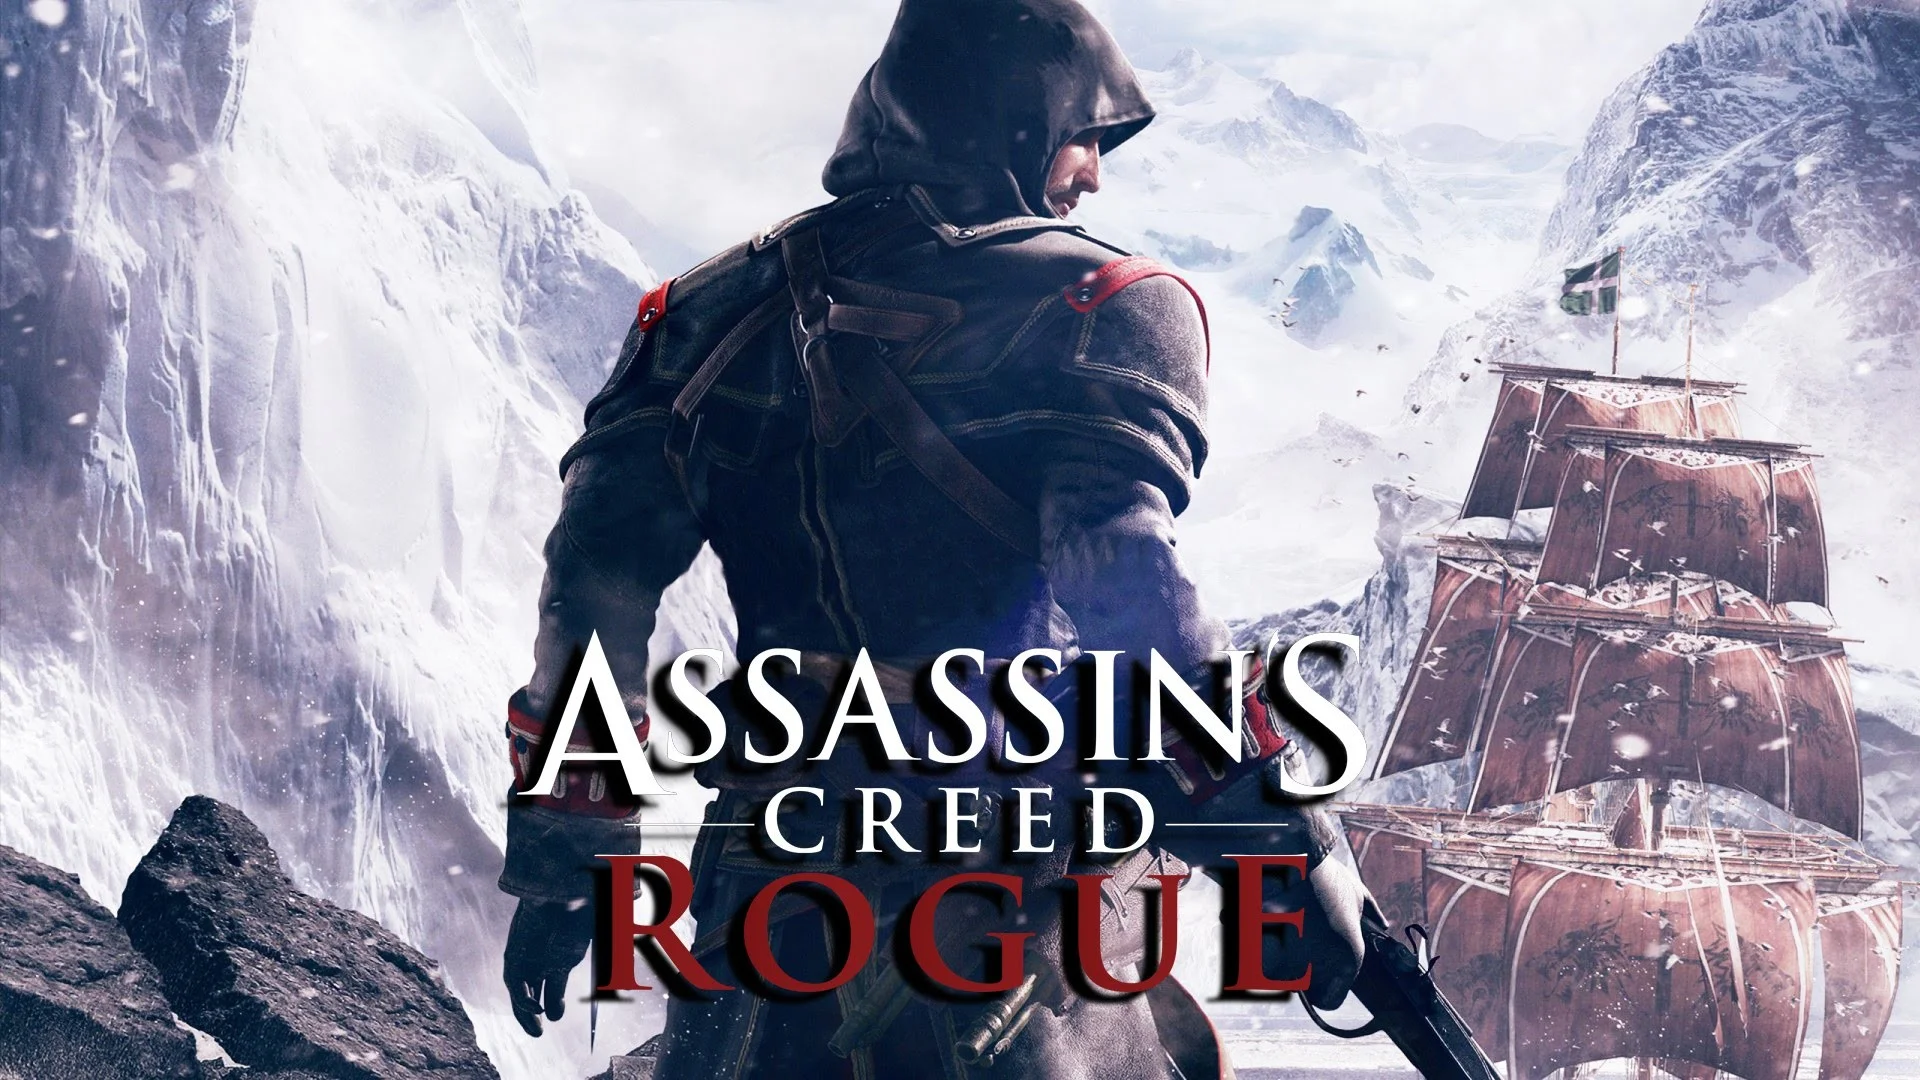 Assassins Creed Rogue PC All Cutscenes Game Movie 1080p HD – YouTube